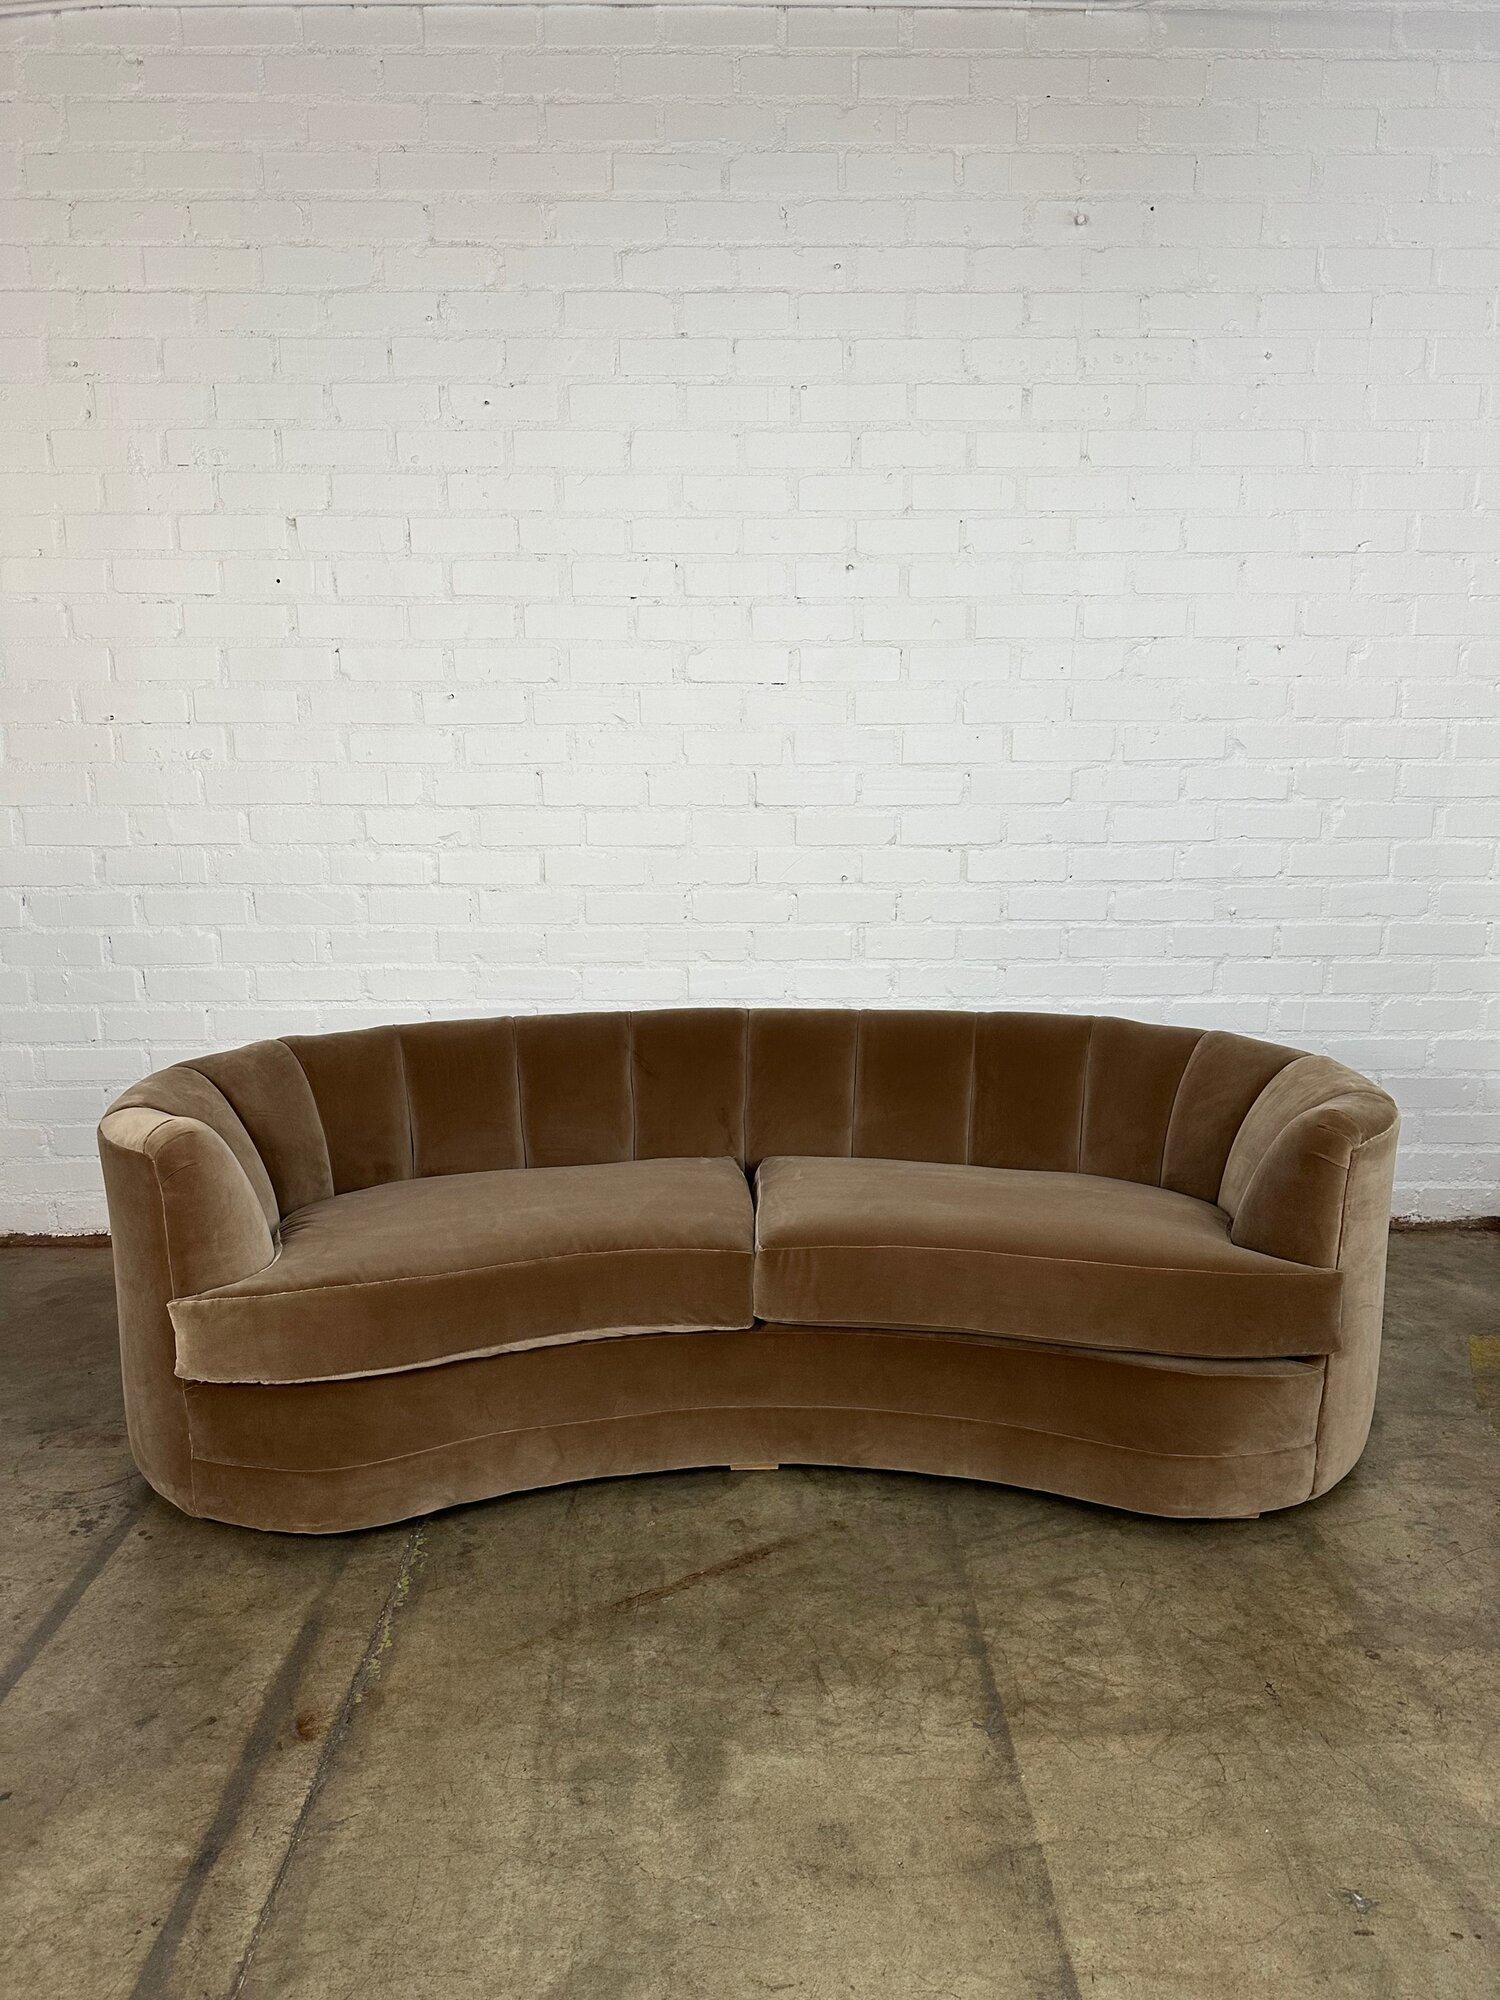 Art Deco Kidney Sofa with Channel Back 2